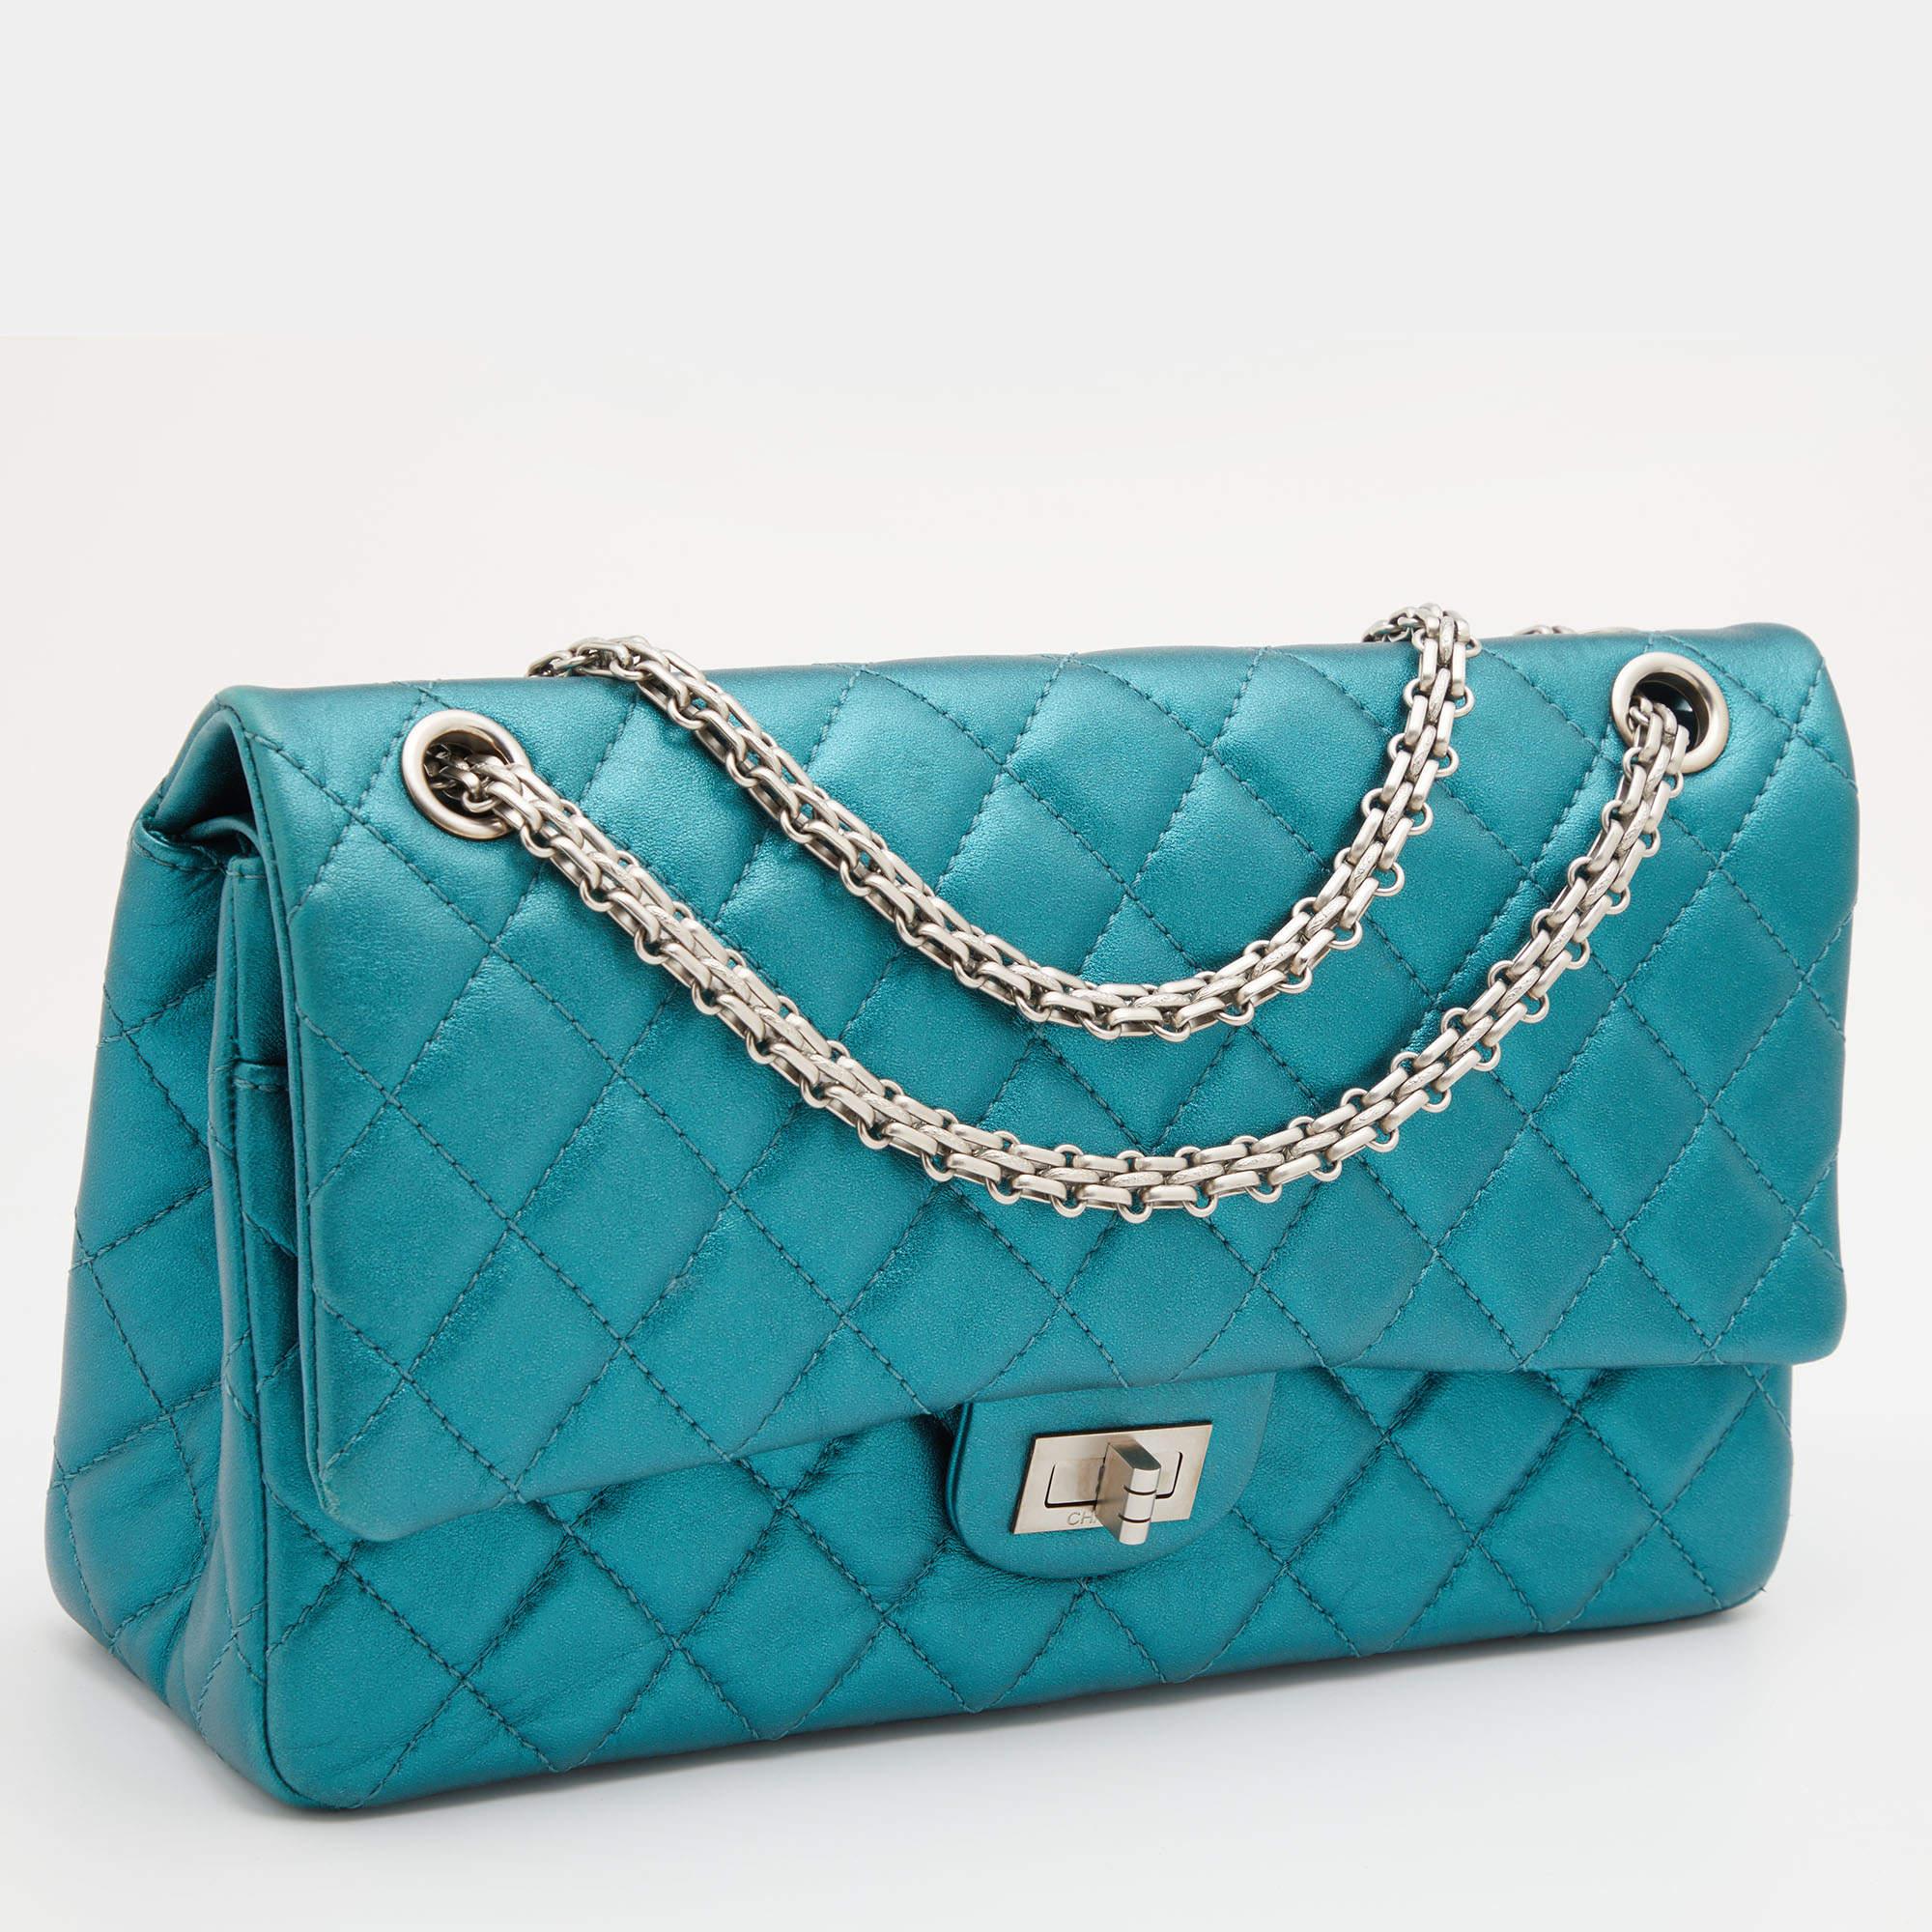 Women's Chanel Metallic Teal Blue Quilted Leather Reissue 2.55 Classic 226 Flap Bag